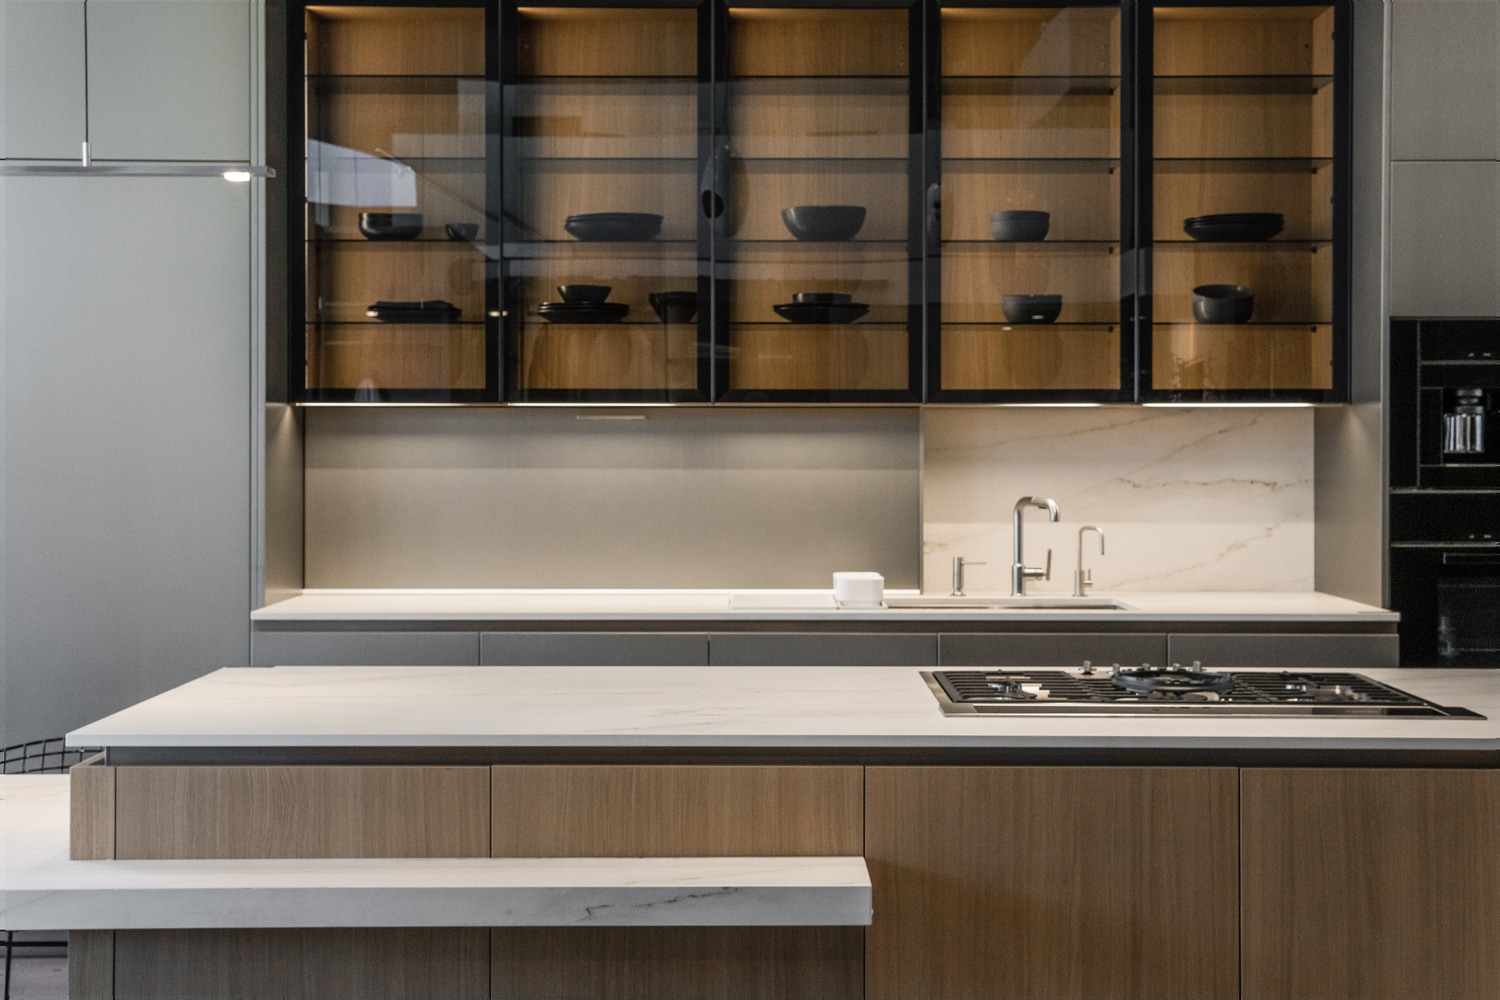 Framed glass cabinets with back panels in UV X-Duna oak wood (matching the island). Under the cabinets, the closed Mover system conceals an organized storage space.